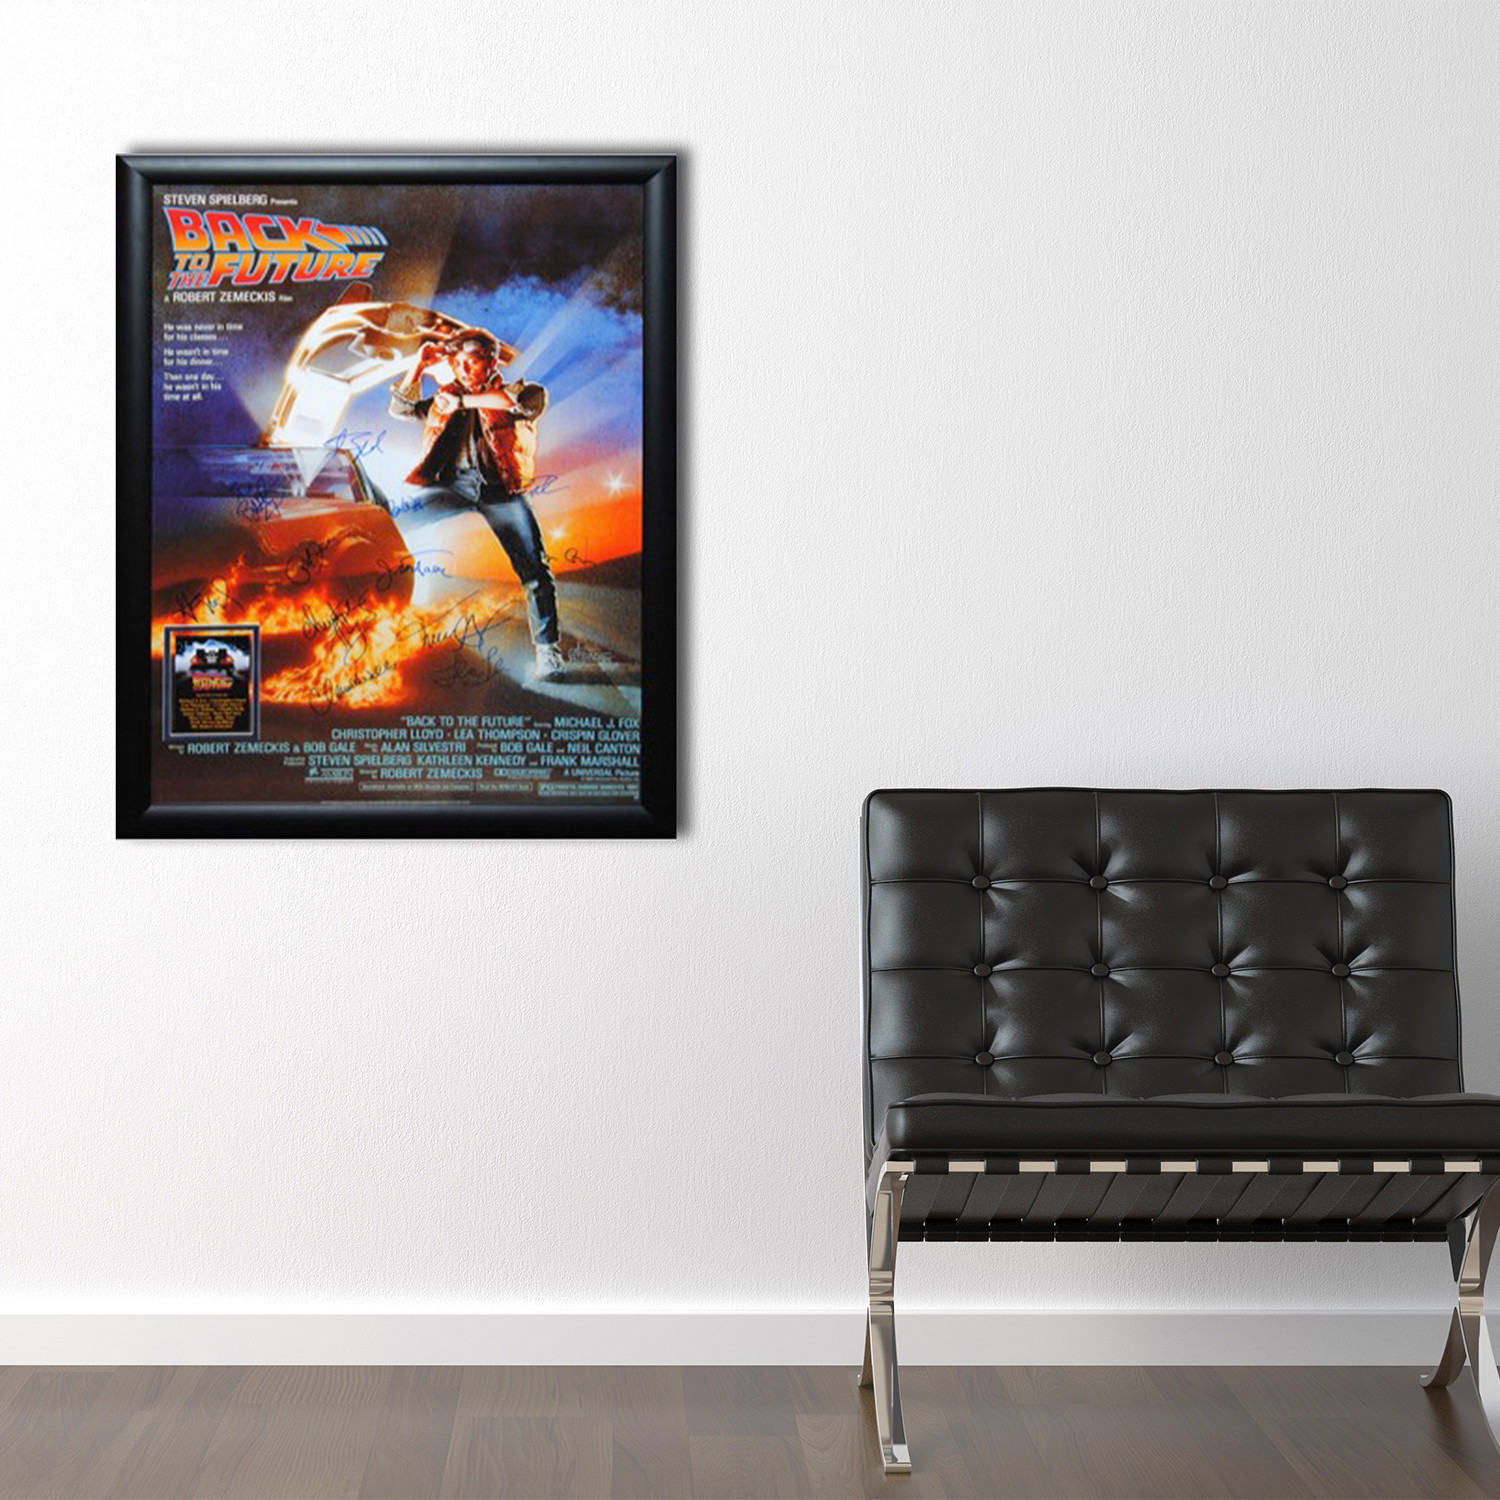 Signed + Framed Poster // Back to the Future The Best of Film + Television Touch of Modern